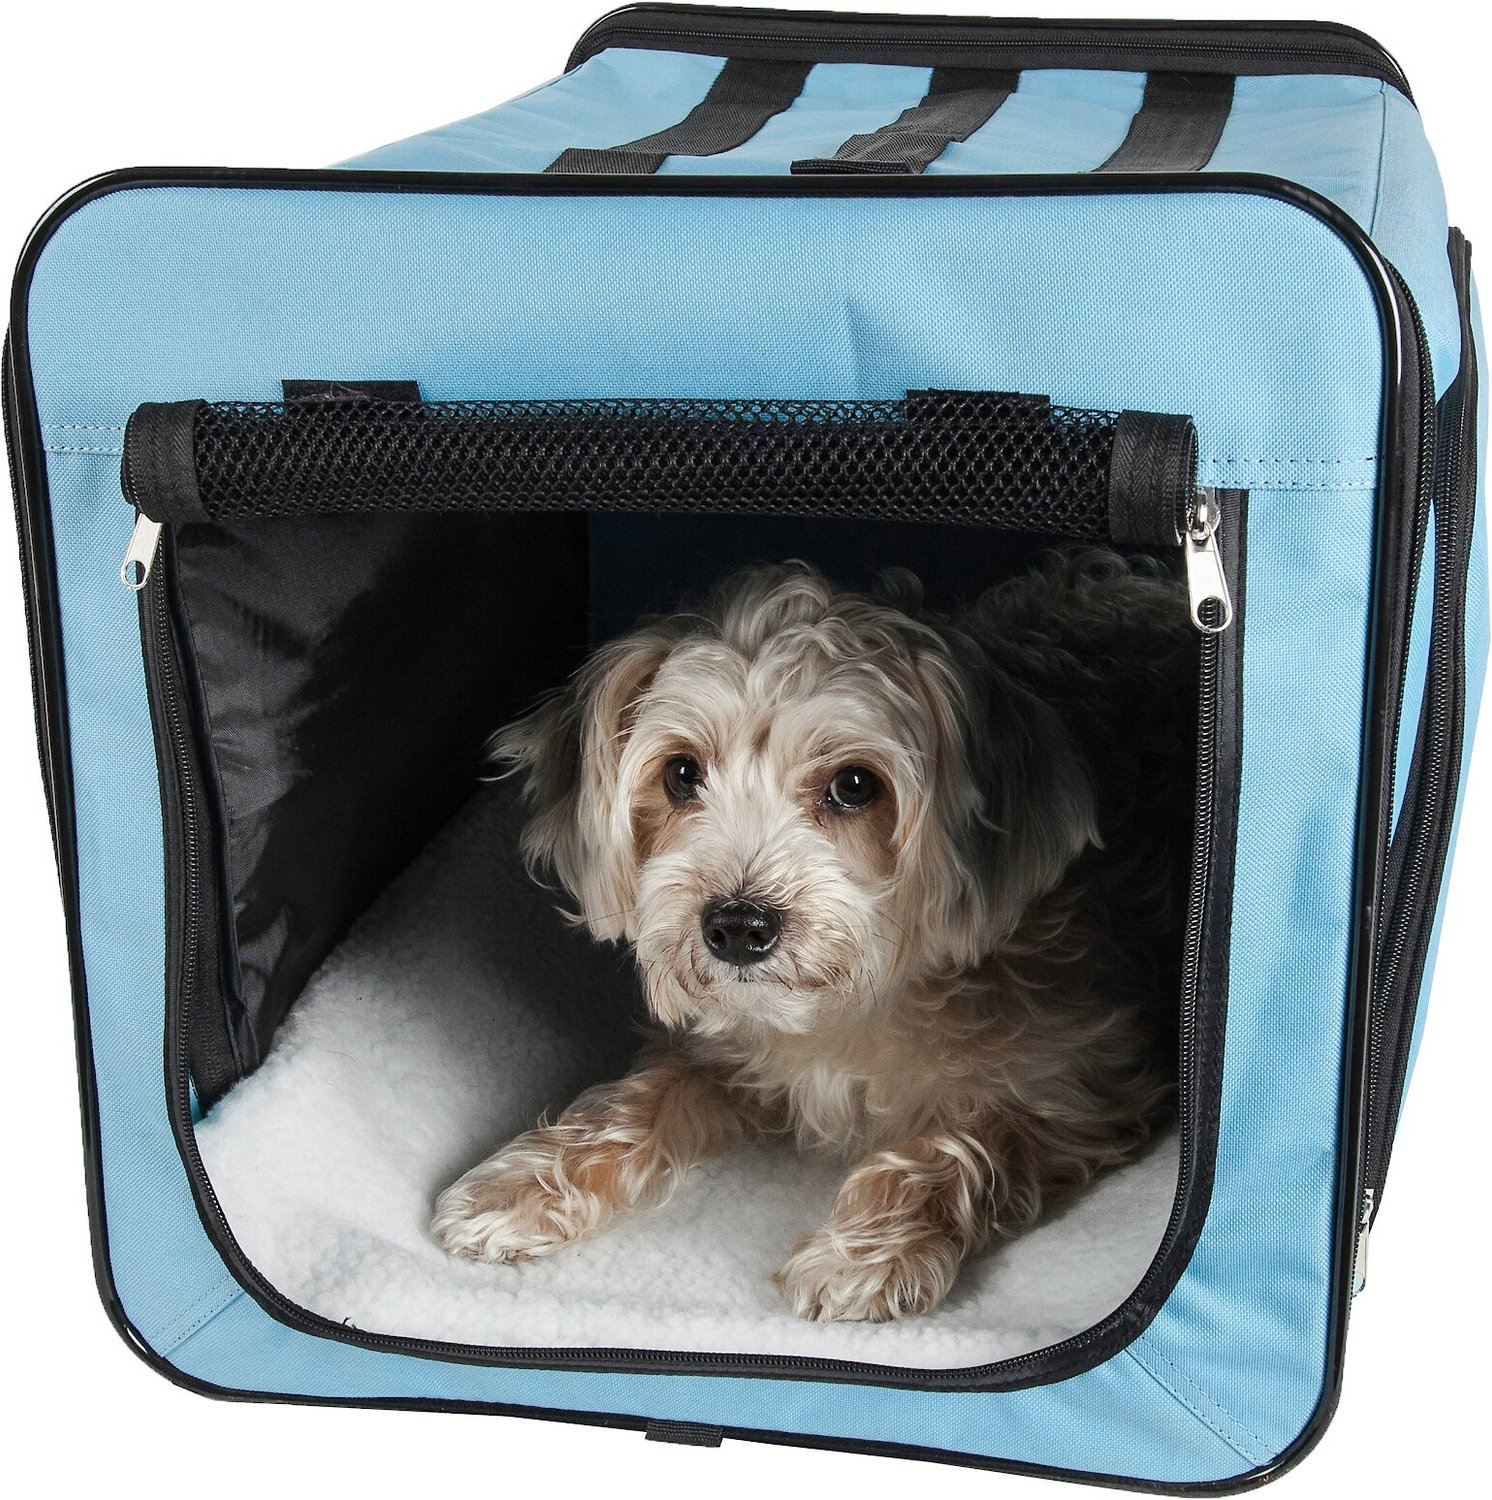 a travel dog crate